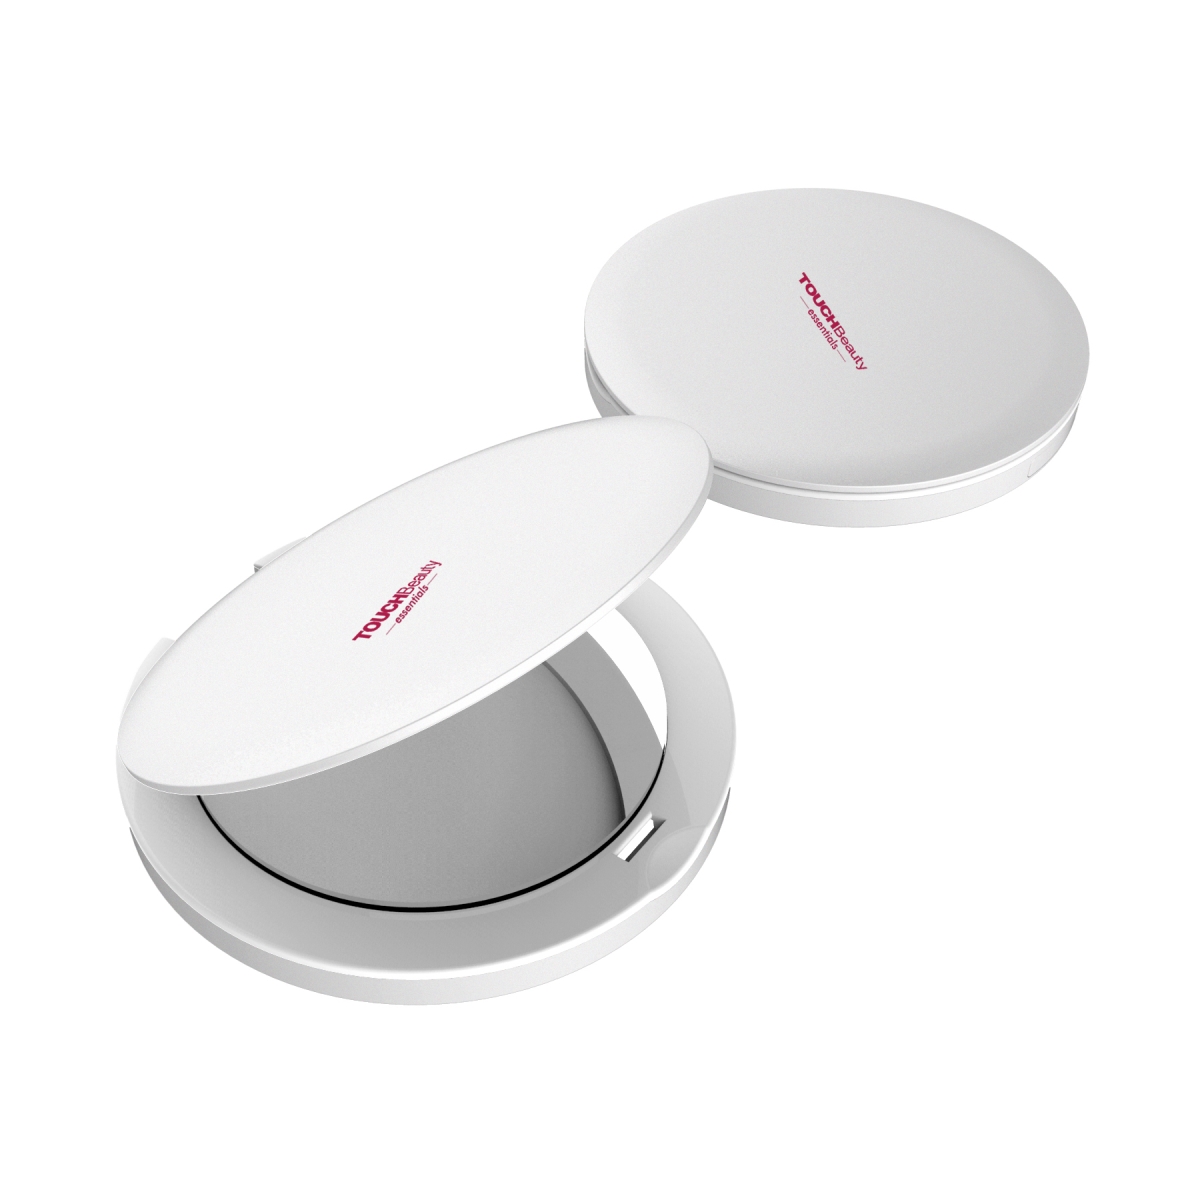 Tb-1275 Touch Beauty Led Light Makeup Compact Mirror